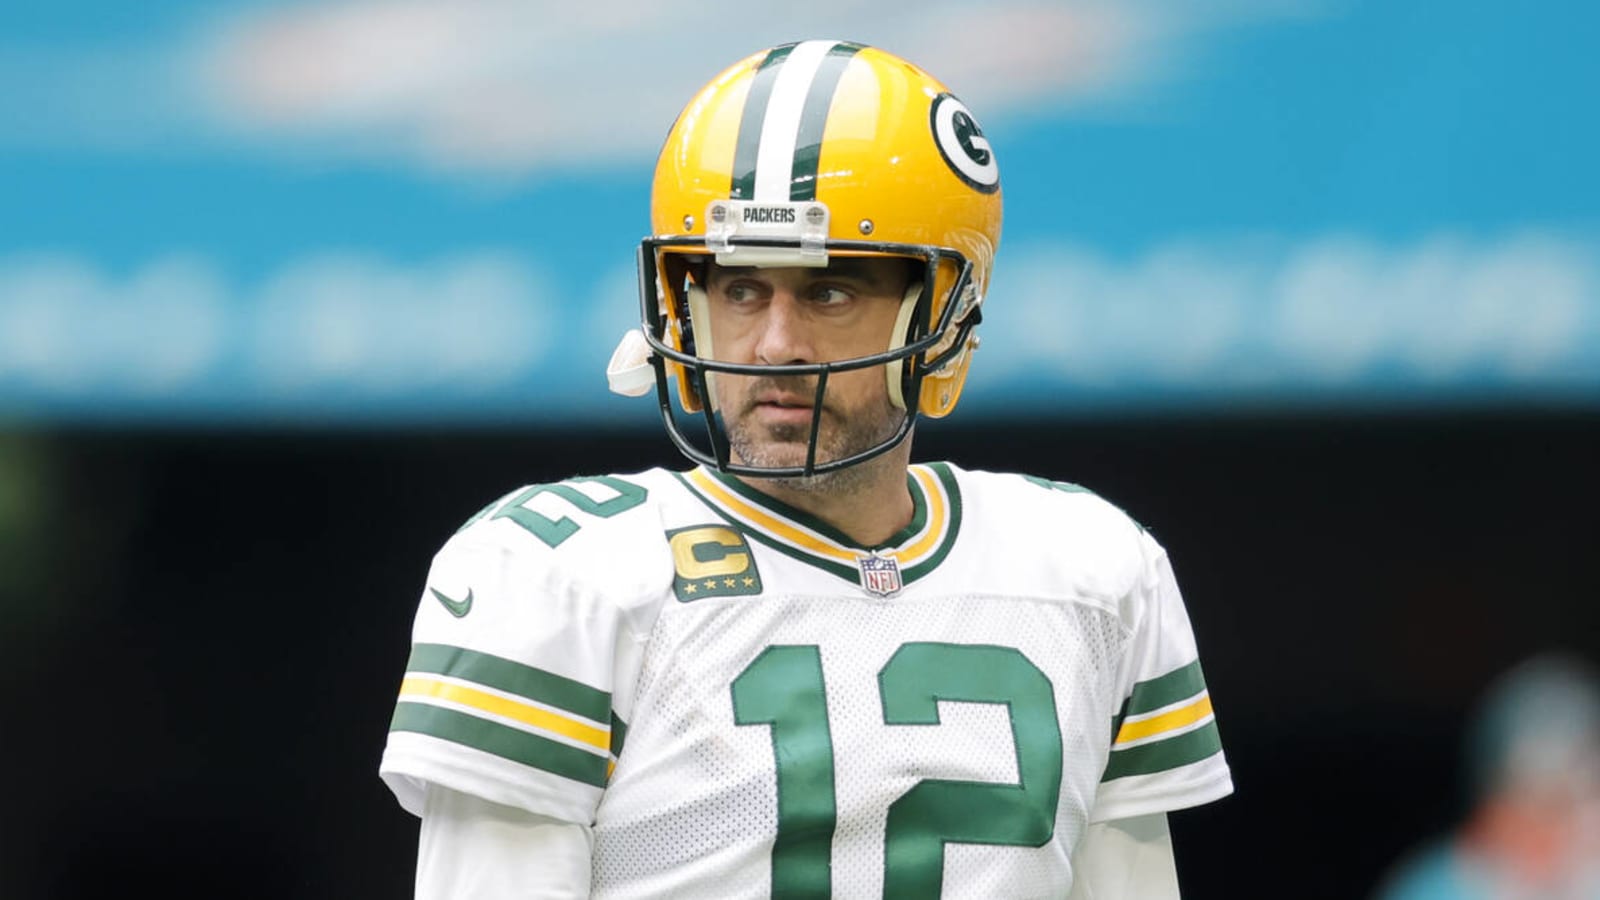 Packers president sounds ready to move on from Aaron Rodgers